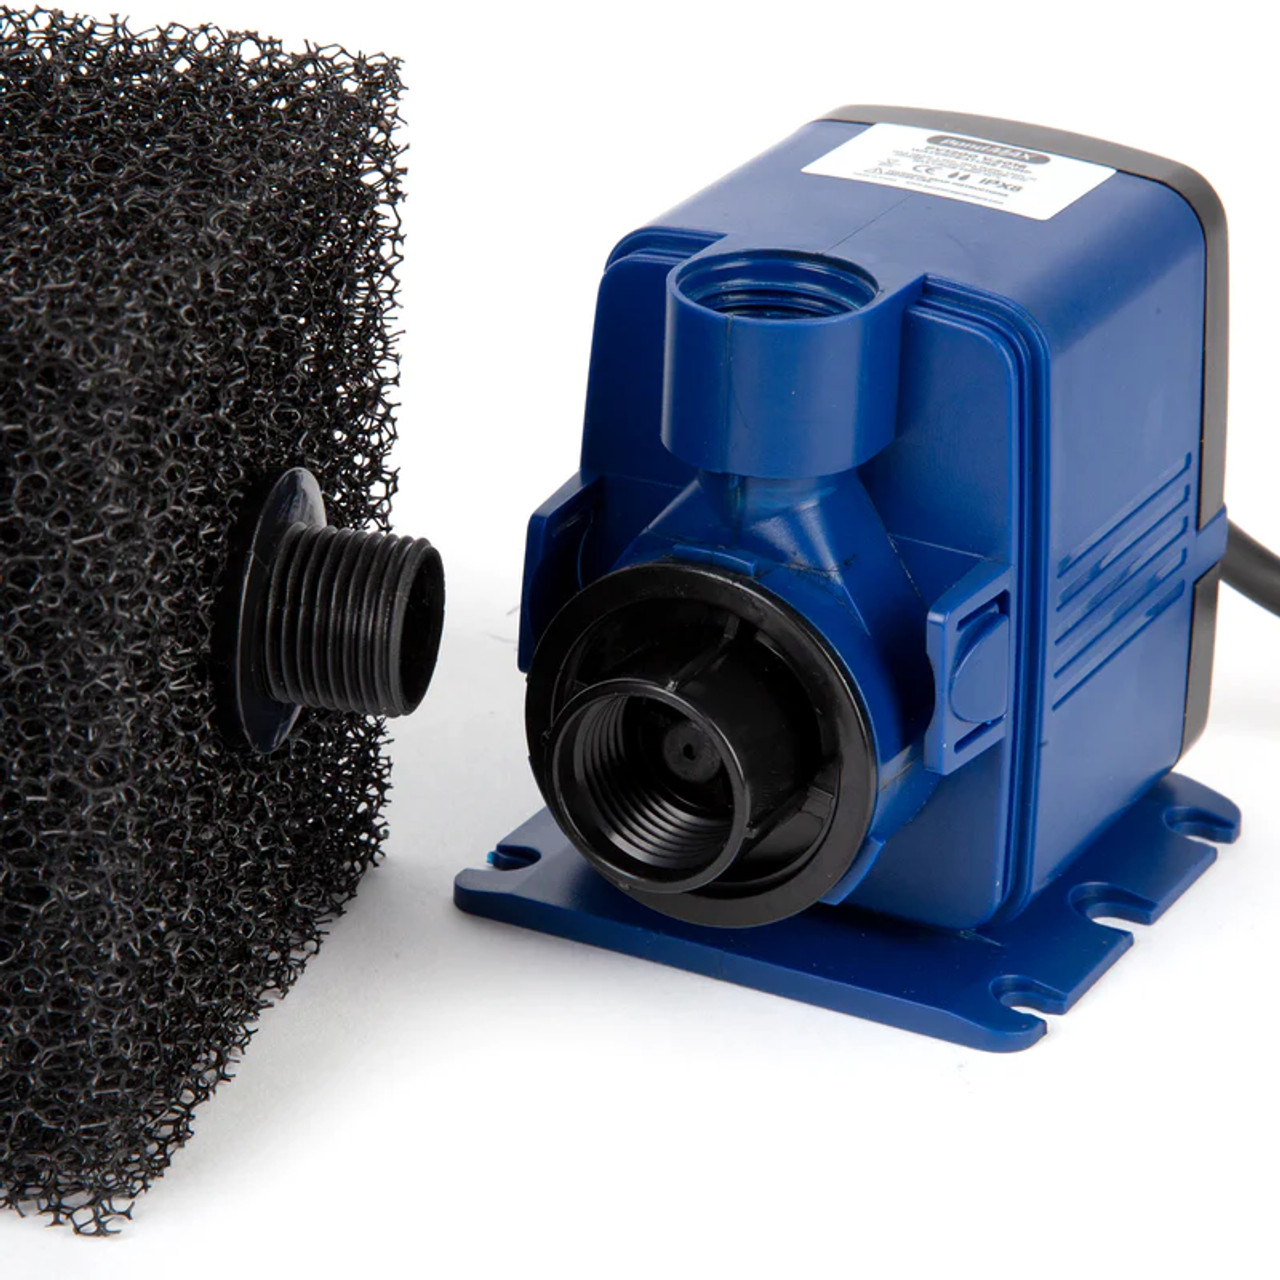 PondMAX Water Feature Pump PV2800 3